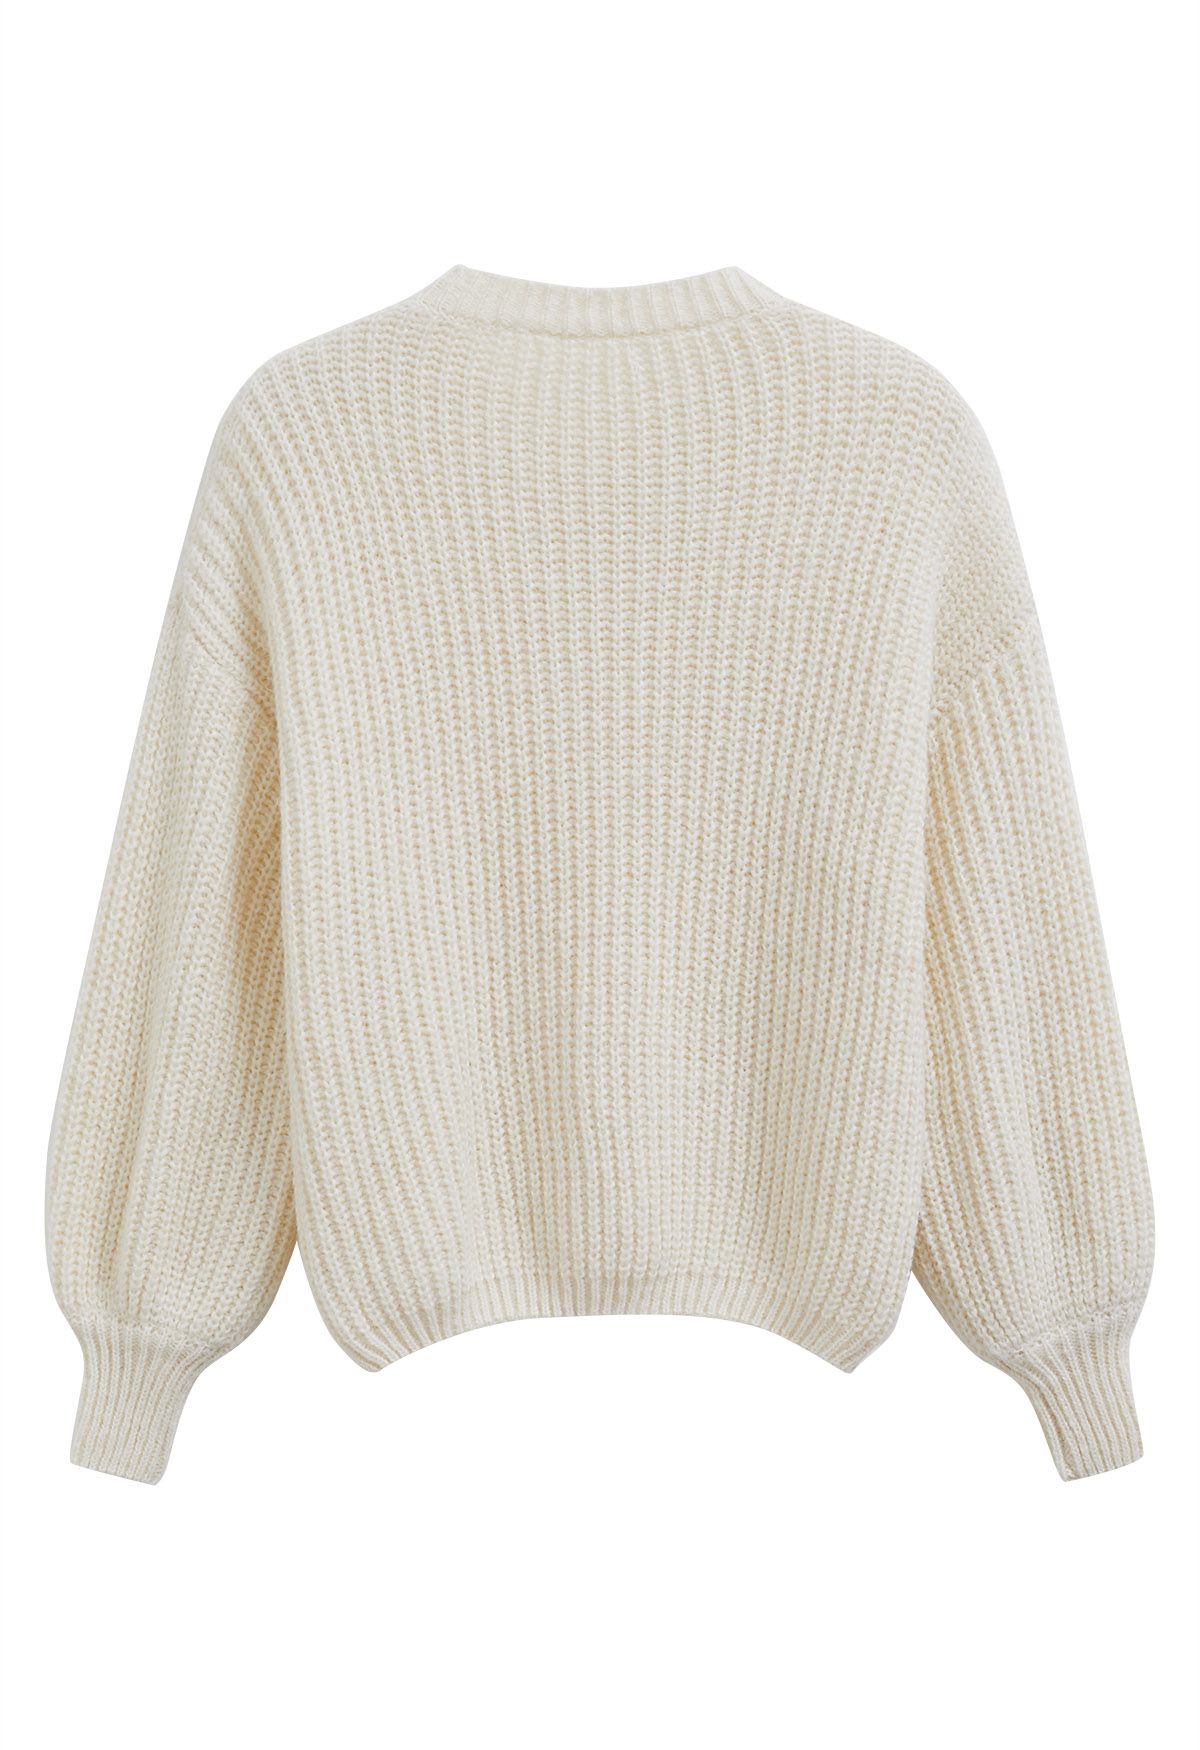 Women's Sweater Solid Ribbed Knit Sweater Sweater for Women (Color